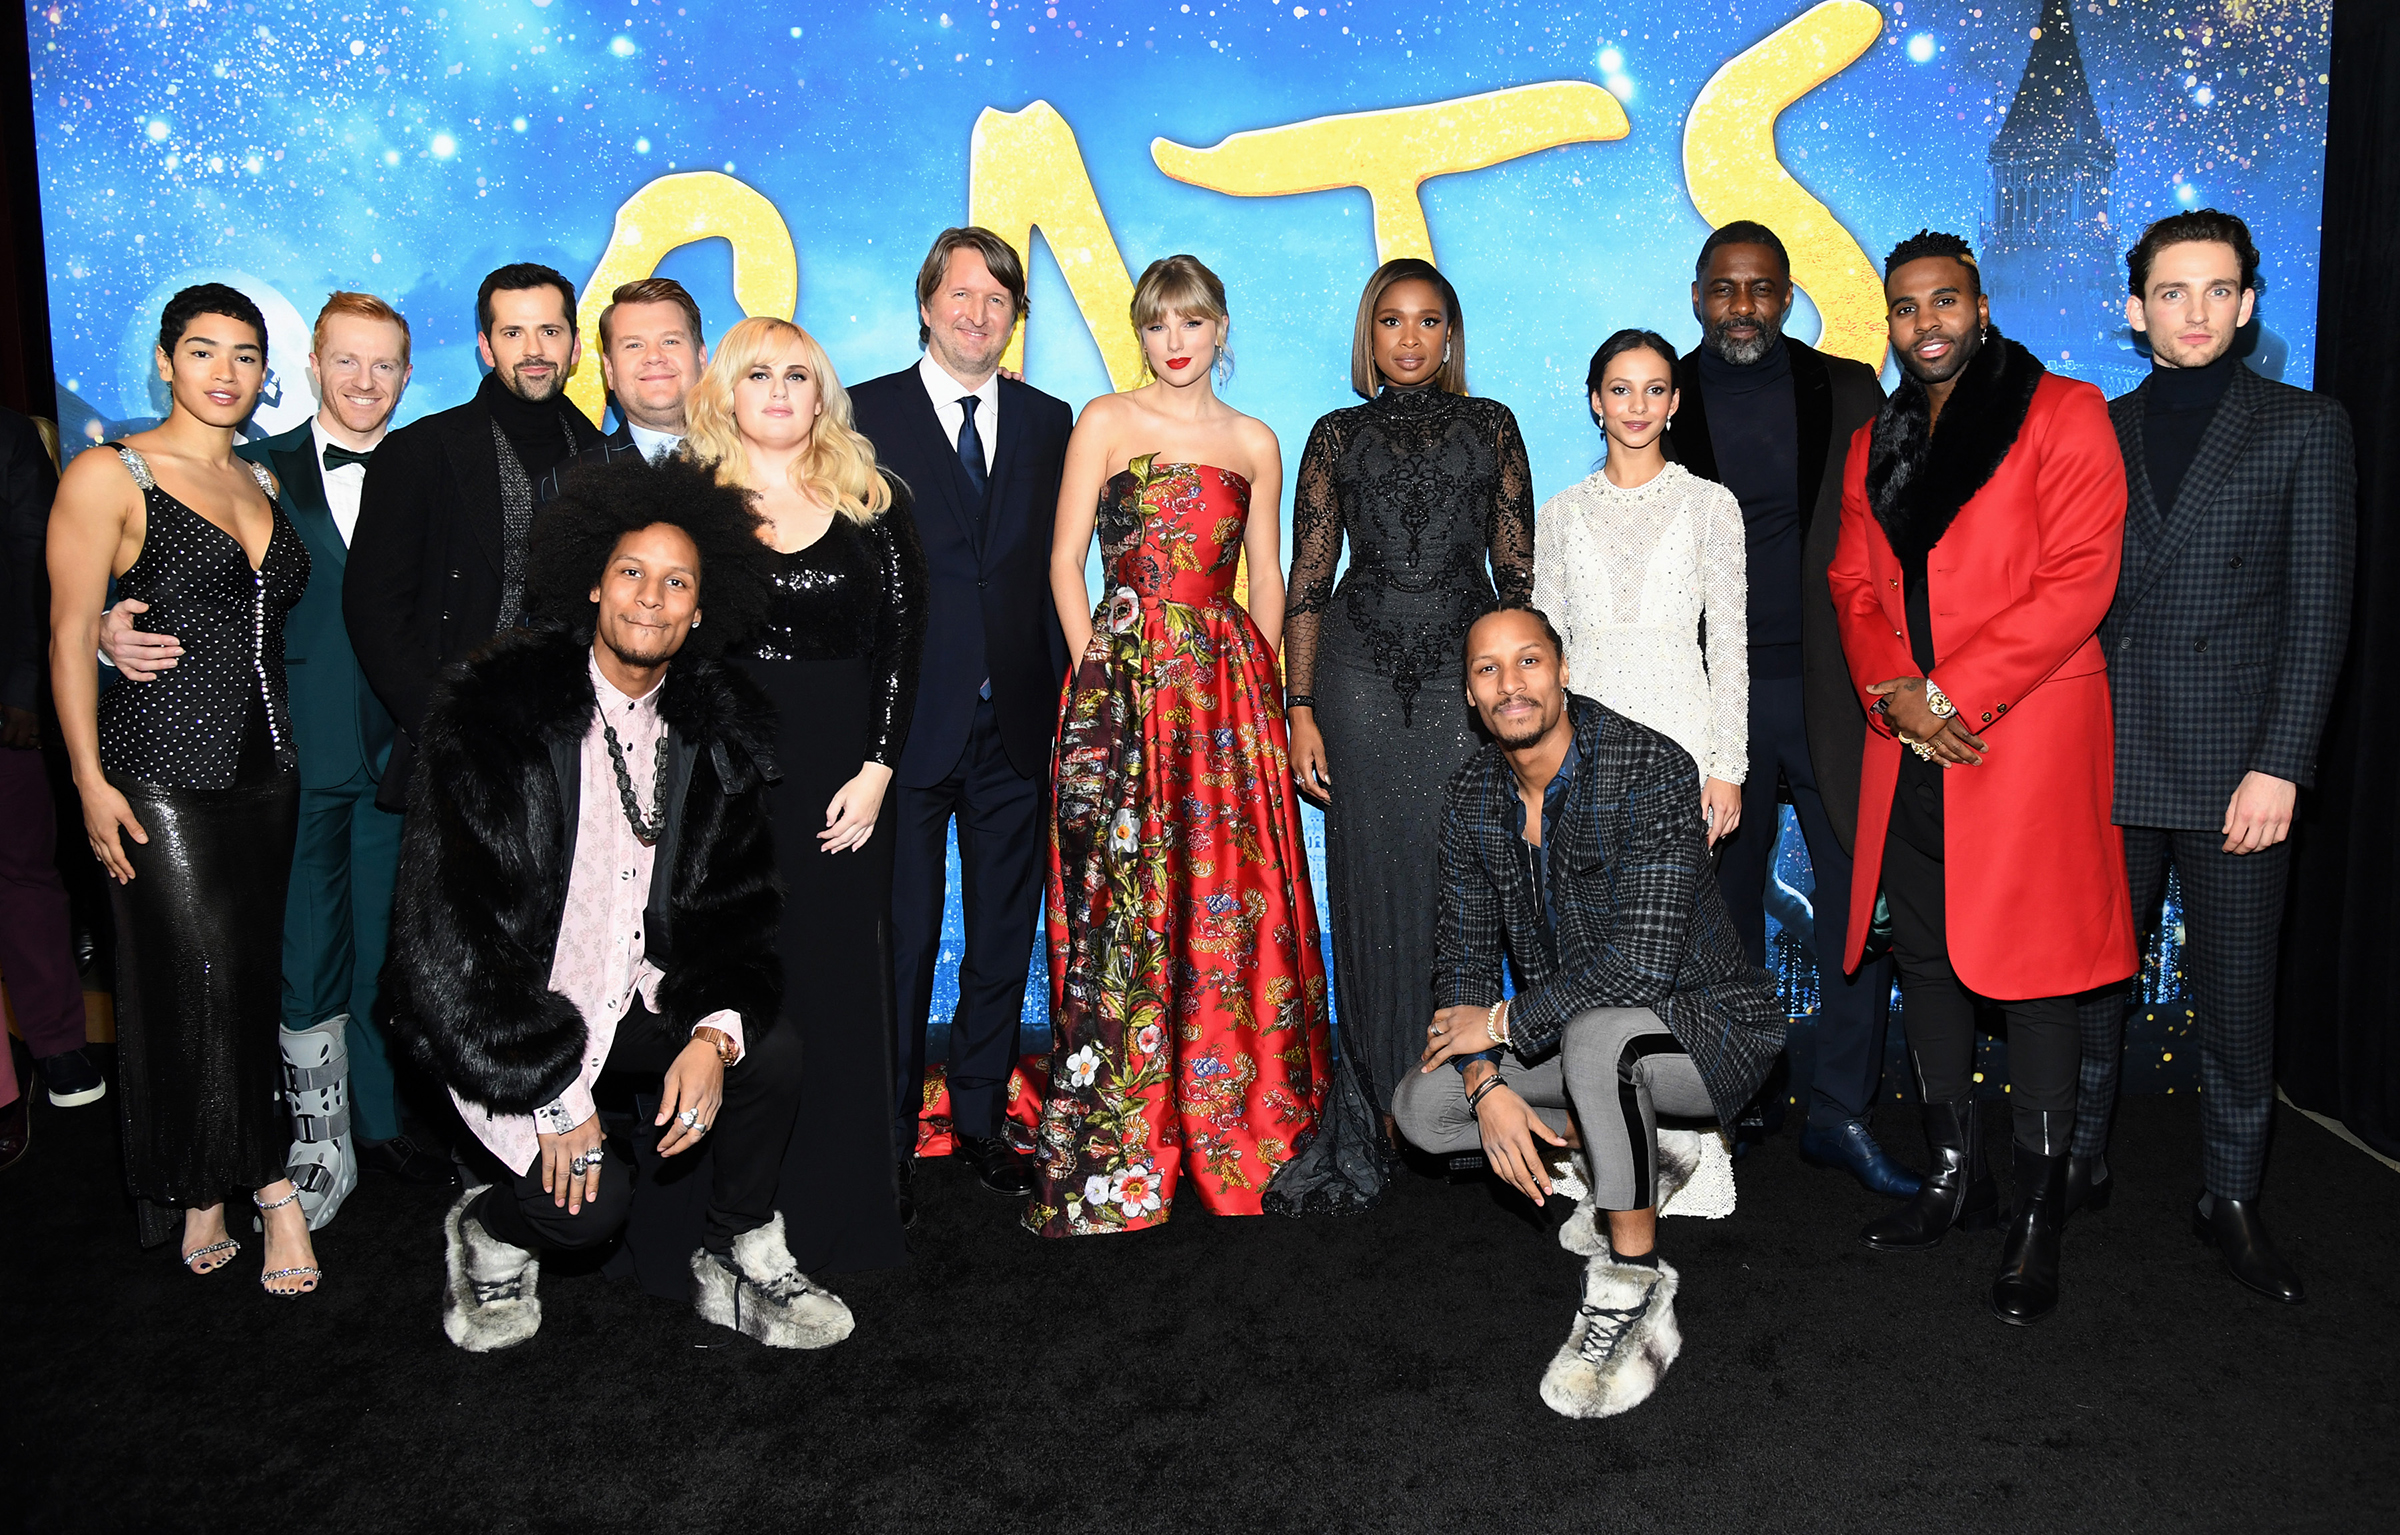 The cast of 'Cats' attends The World Premiere of Cats, presented by Universal Pictures in New York City on Dec 16, 2019. (Kevin Mazur—Universal Pictures/Getty Images)